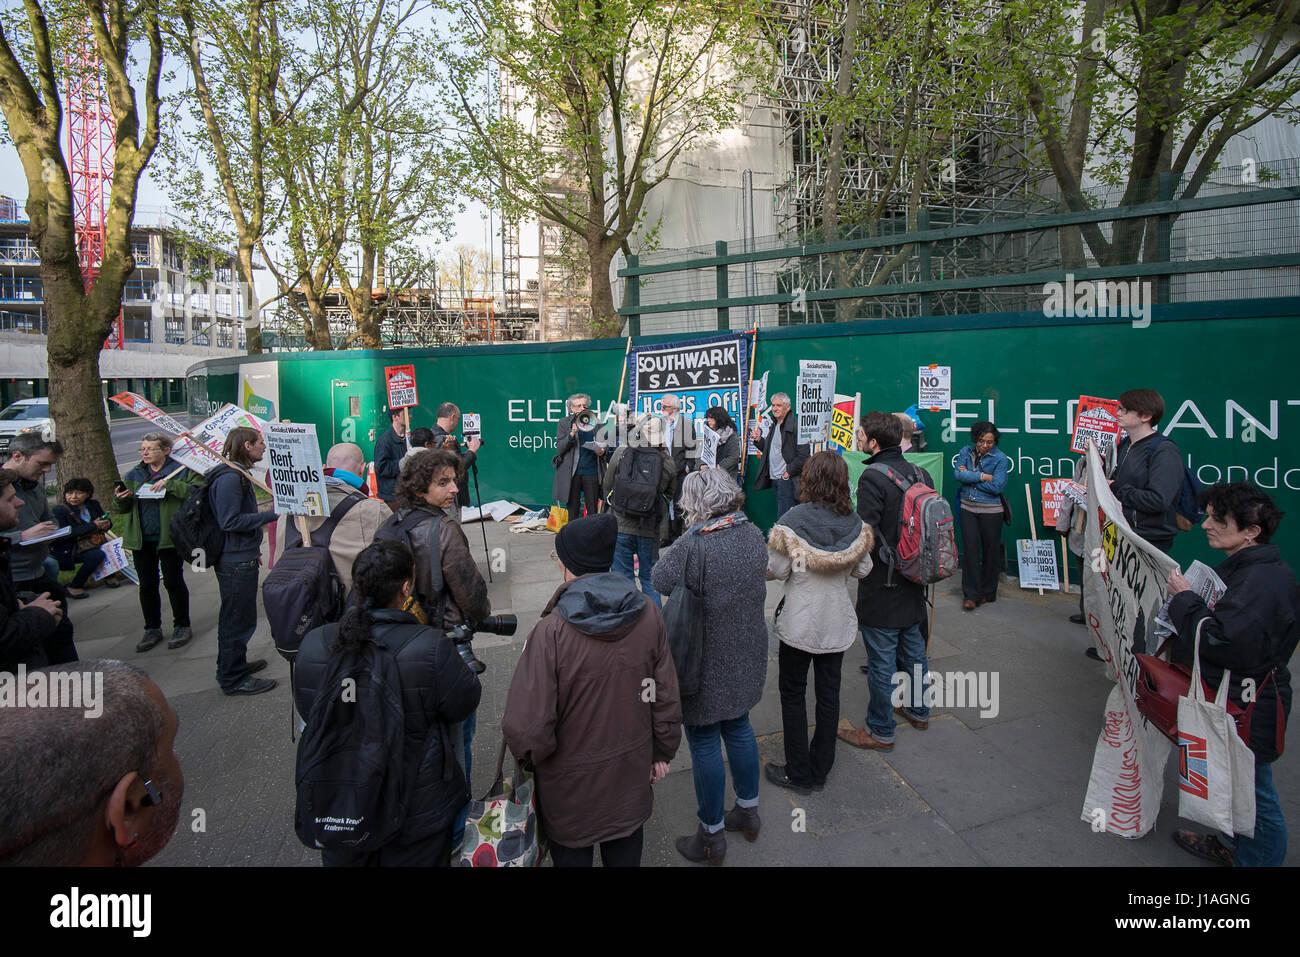 Elephant and Castle, London, UK. 19th Apr, 2017. Protestors gather at the former council estate at Elephant & Castle, which was demolished by developers who want to rebrand the site ‘Elephant Park’.  A new report by Transparency International, looking at the site, finds “the number of South Gardens units sold abroad is 51 out of 51 properties, as per Land Registry documents”. Credit: Mike Kear/Alamy Live News Stock Photo